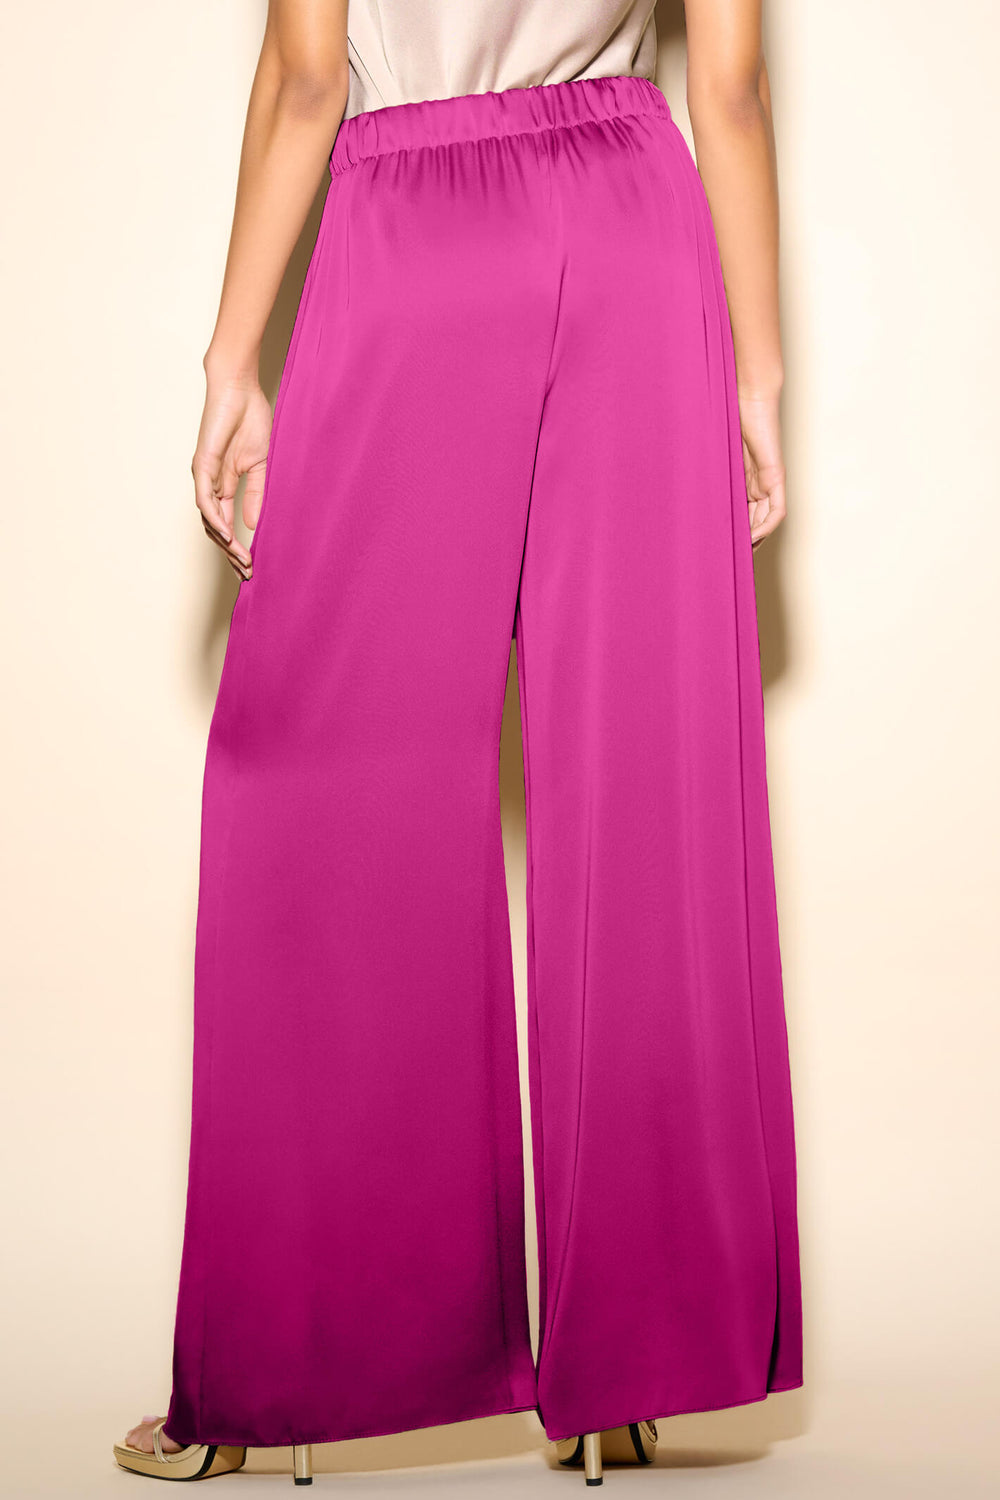 Joseph Ribkoff 233785 Opulence Pink Wide Leg Trousers - Experience Boutique